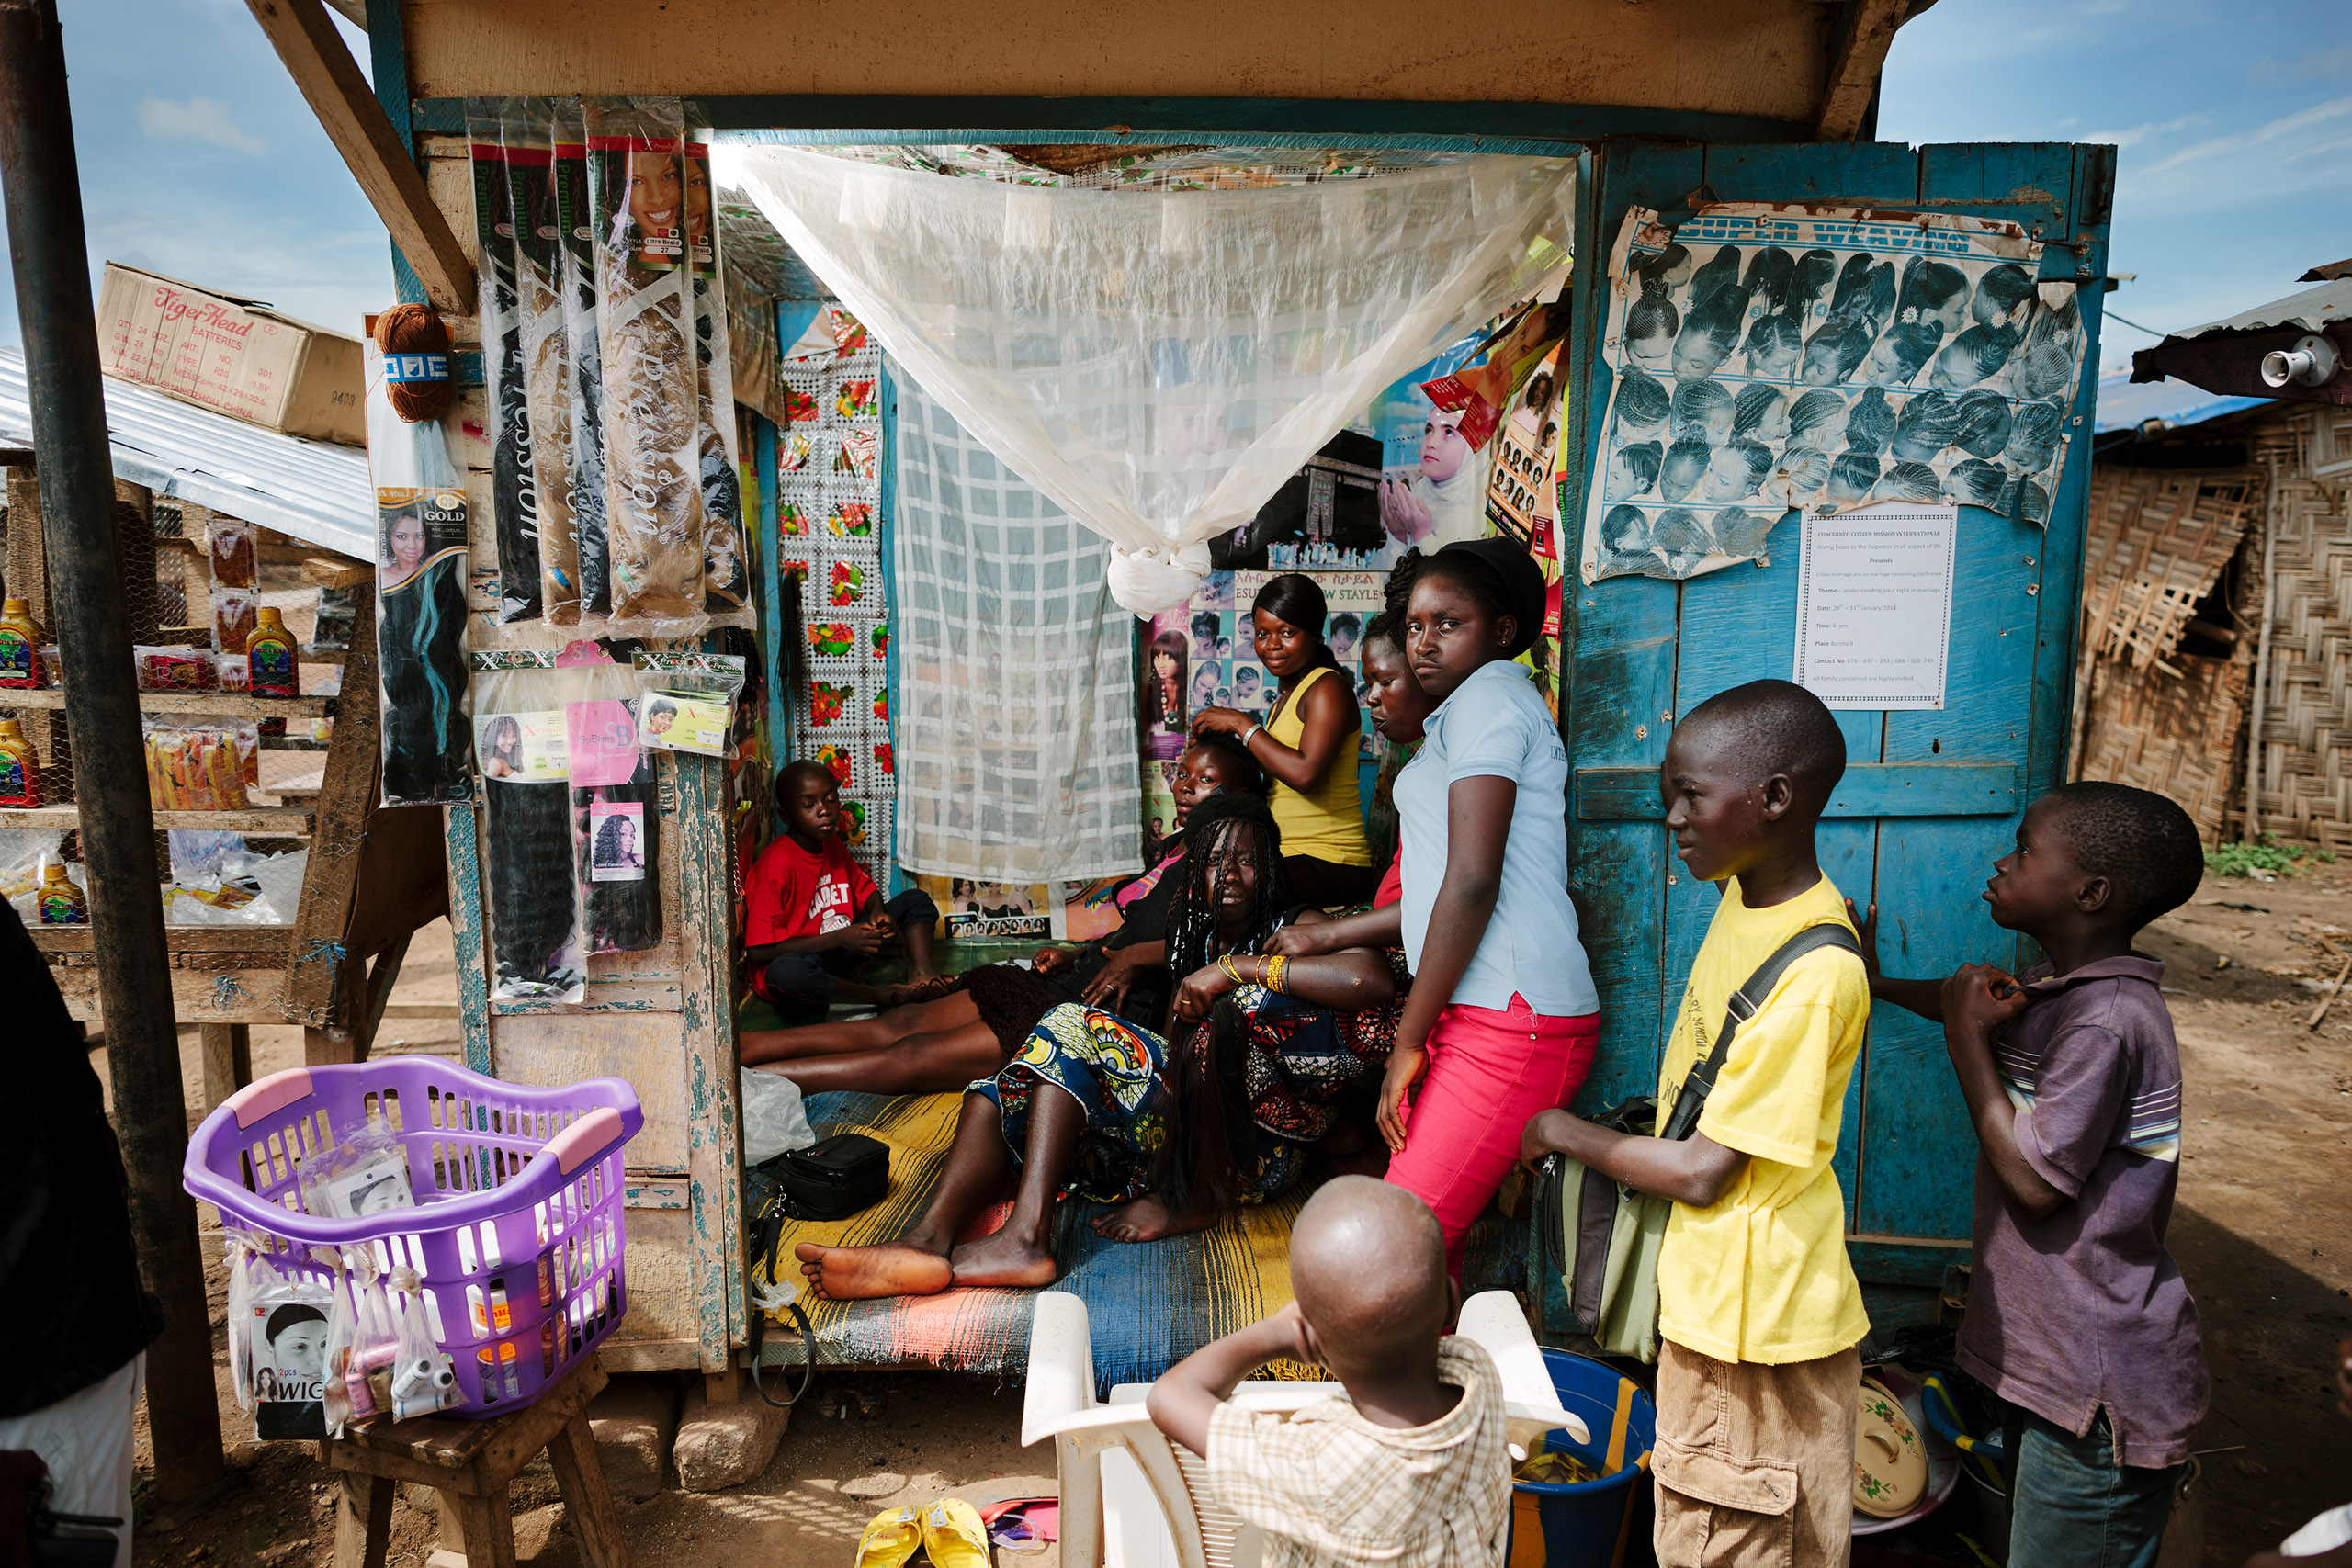 Sierra Leone hairdresser surrounded by kids, photographed in the eastern city of Kenema